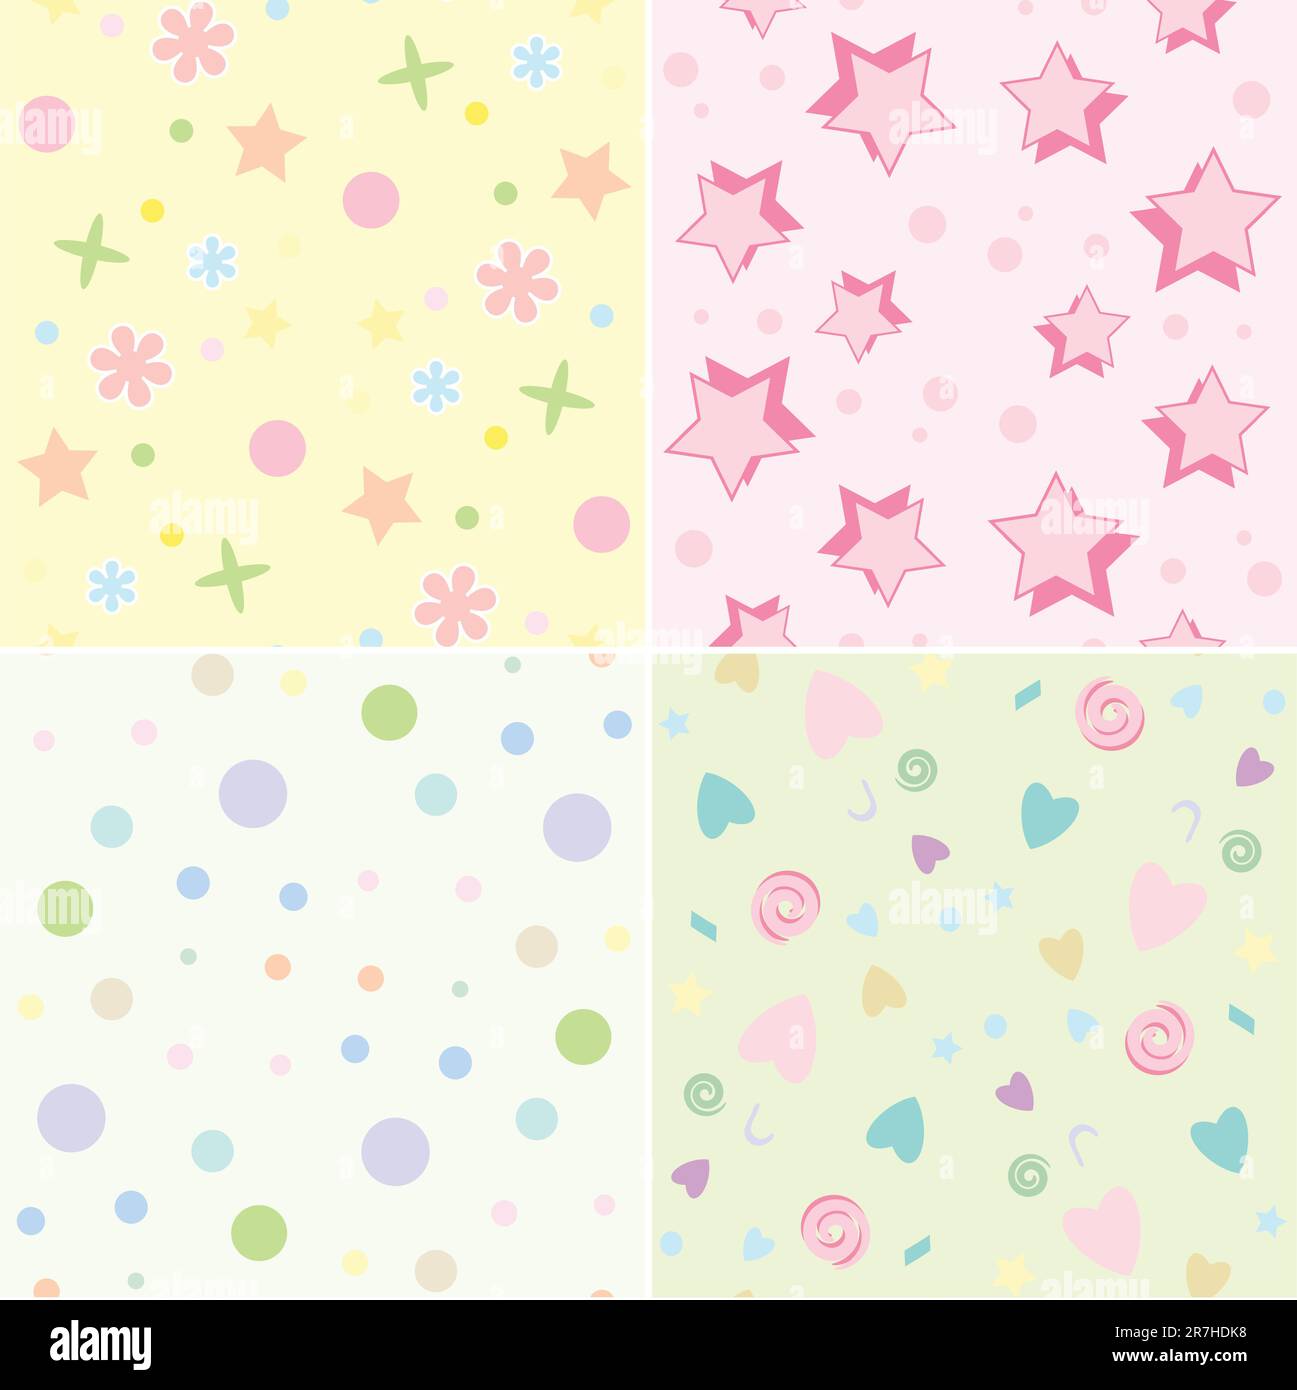 Seamless tile backgrounds with a childrens theme Stock Vector